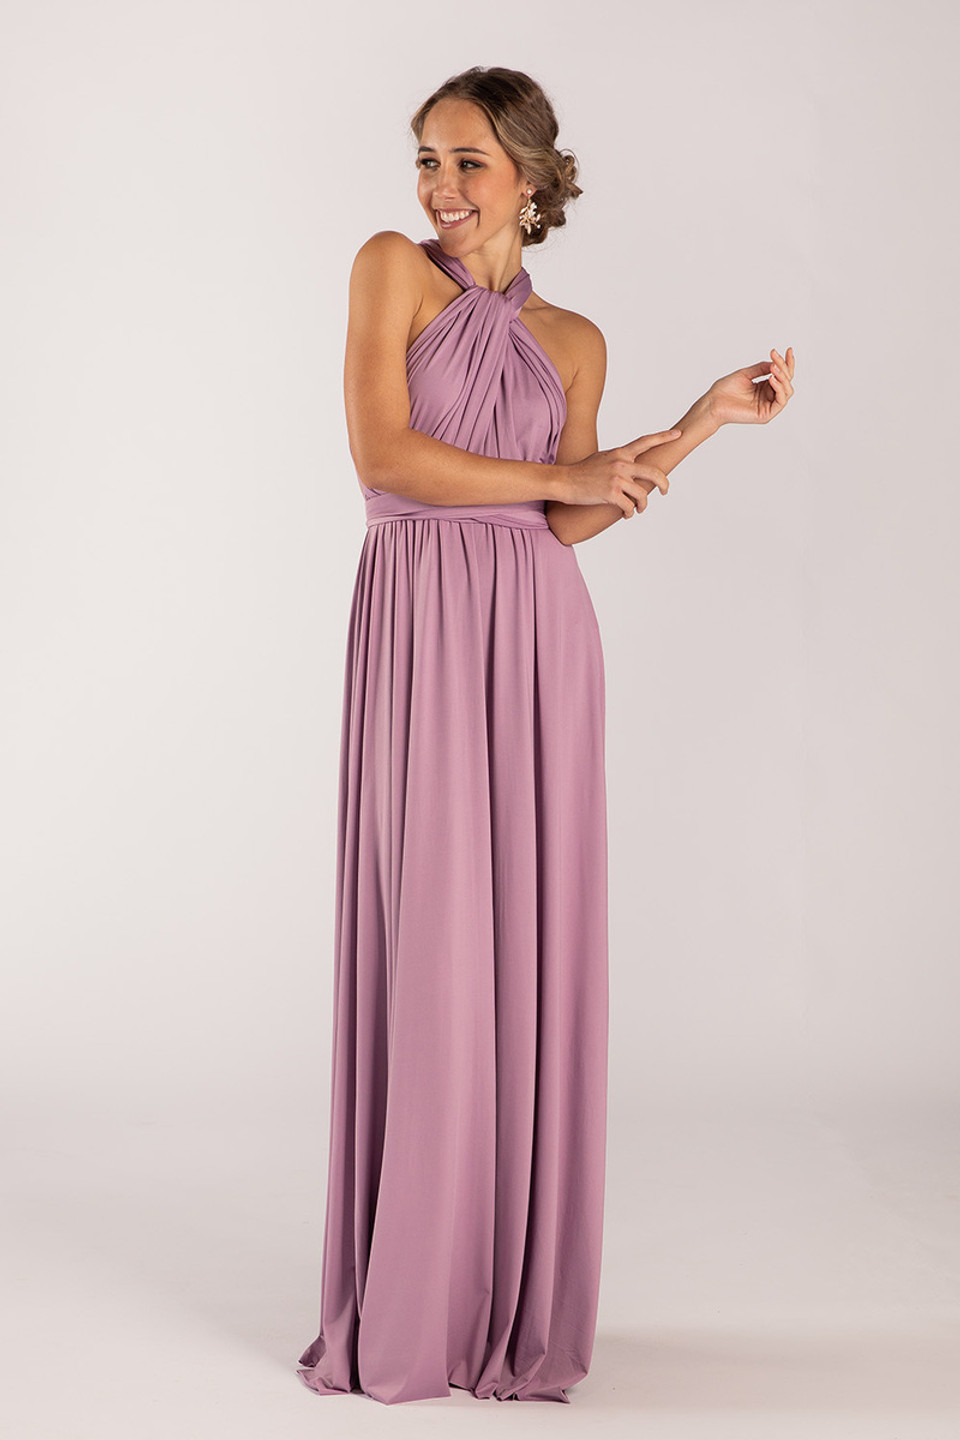 Classic Multiway Infinity Bridesmaid Dress In Dusty Purple - Formal ...